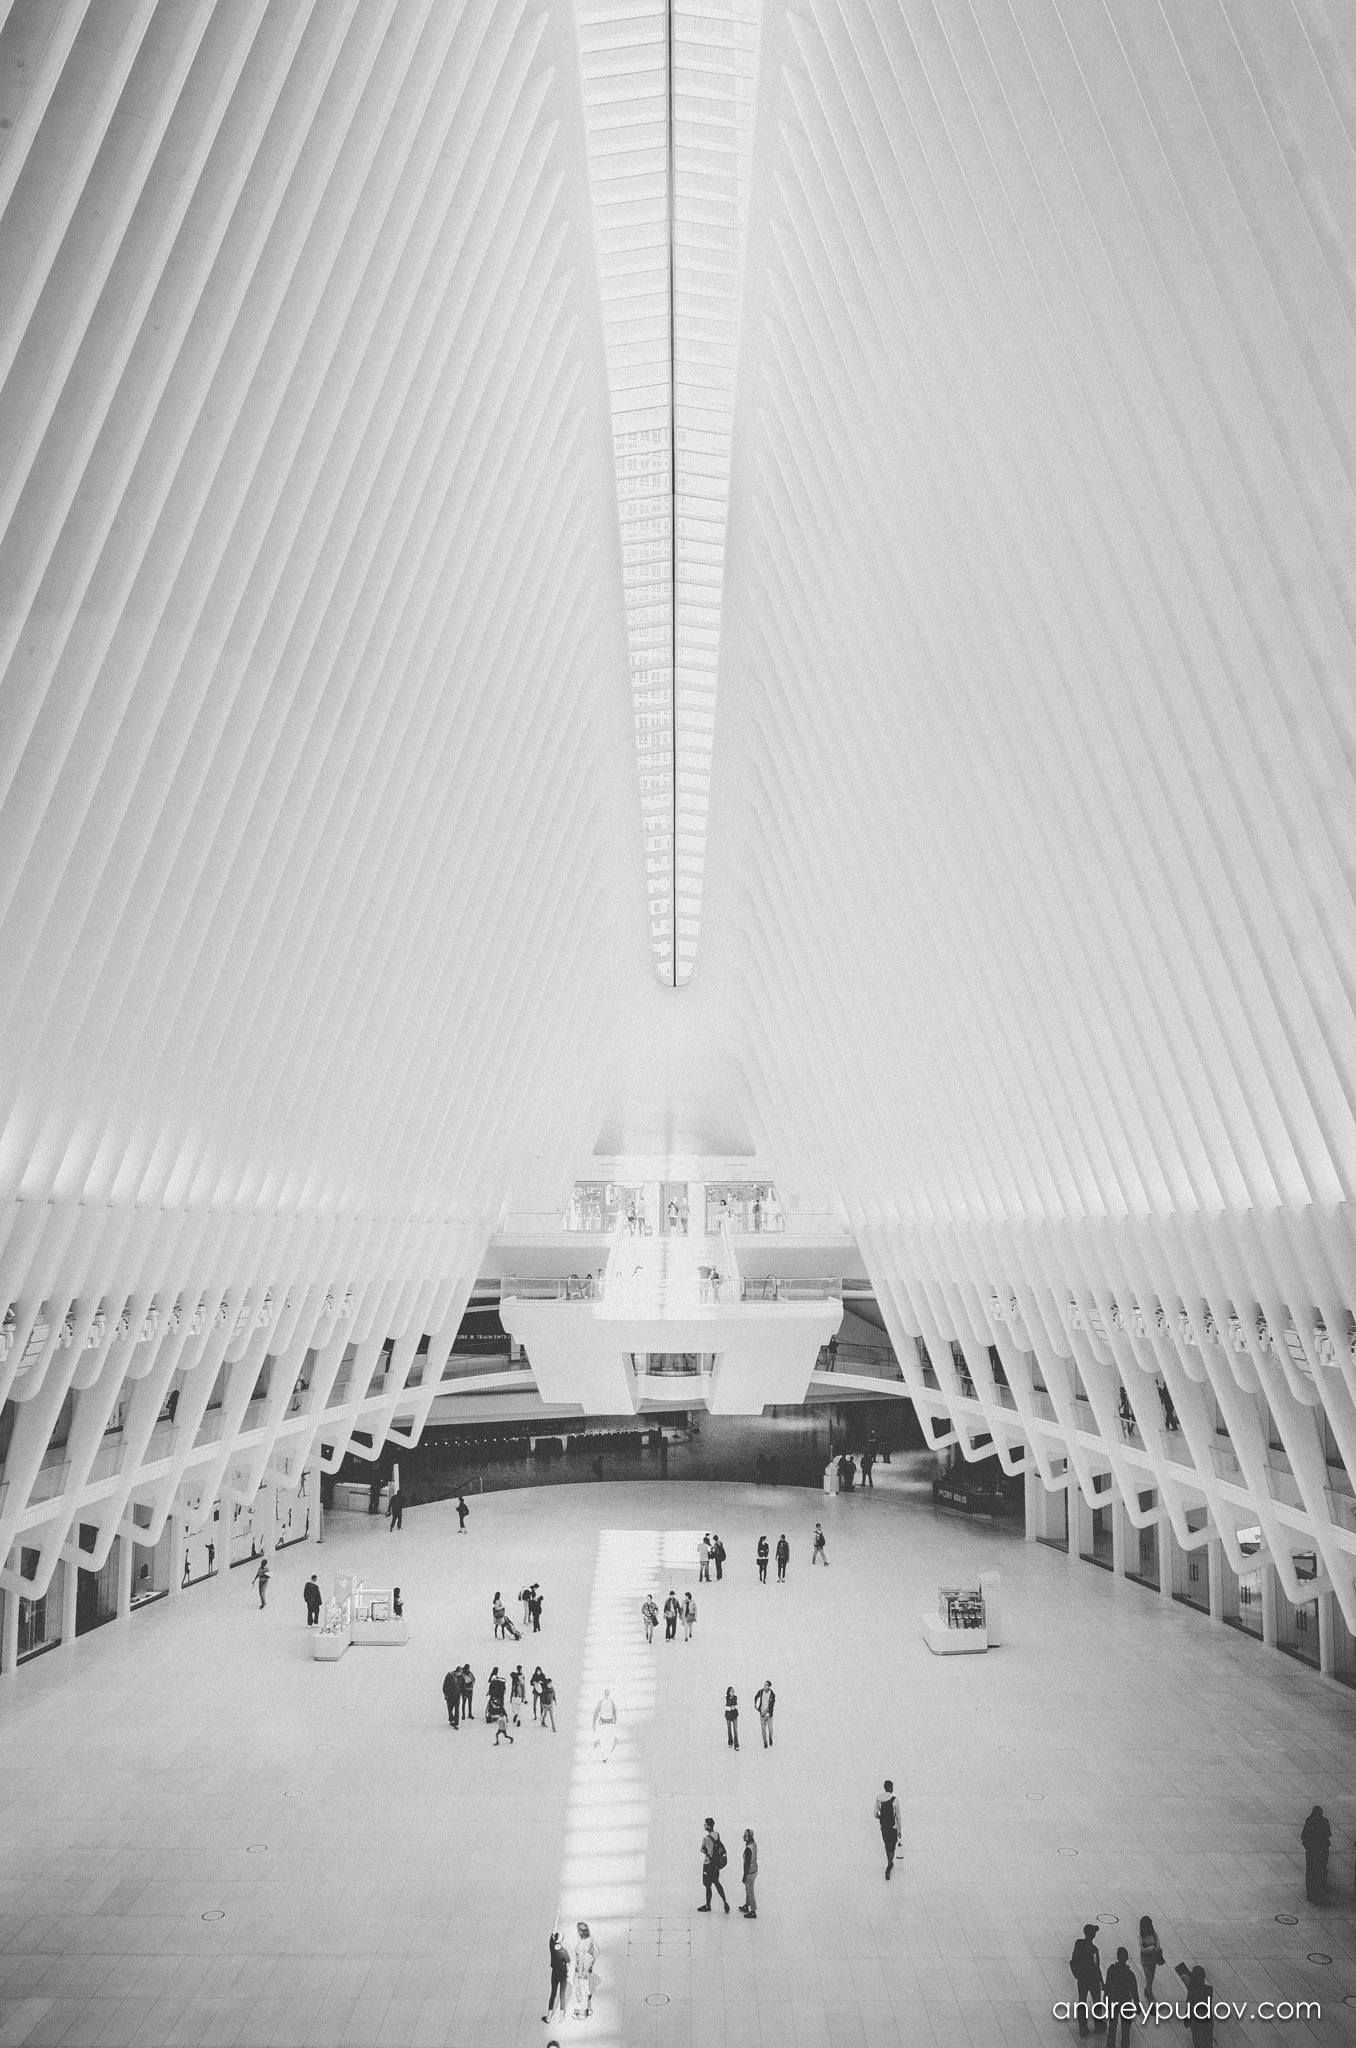 Oculus / World Trade Center Station

One of the first decisions that Calatrava had in mind at the time of conceiving the project was the realization of the building at street level, an independent structure along the Wedge of Light Square, by Daniel Libeskind. “Oculus”, the centerpiece of the Transportation Center that presents the new station to the world is a kind of pause in the middle of the dense glass and steel towers that surround it.

The construction, due to constant delays, lasted 12 years and was finally inaugurated on March 3, 2016, without too many celebrations. The cost of its construction, $ 4 billion, greatly exceeded its original cost, becoming, until the time of its inauguration, the most expensive train station in the world and the third largest transportation center in New York, after Grand Central and Penn Station, both in Midtown Manhattan.